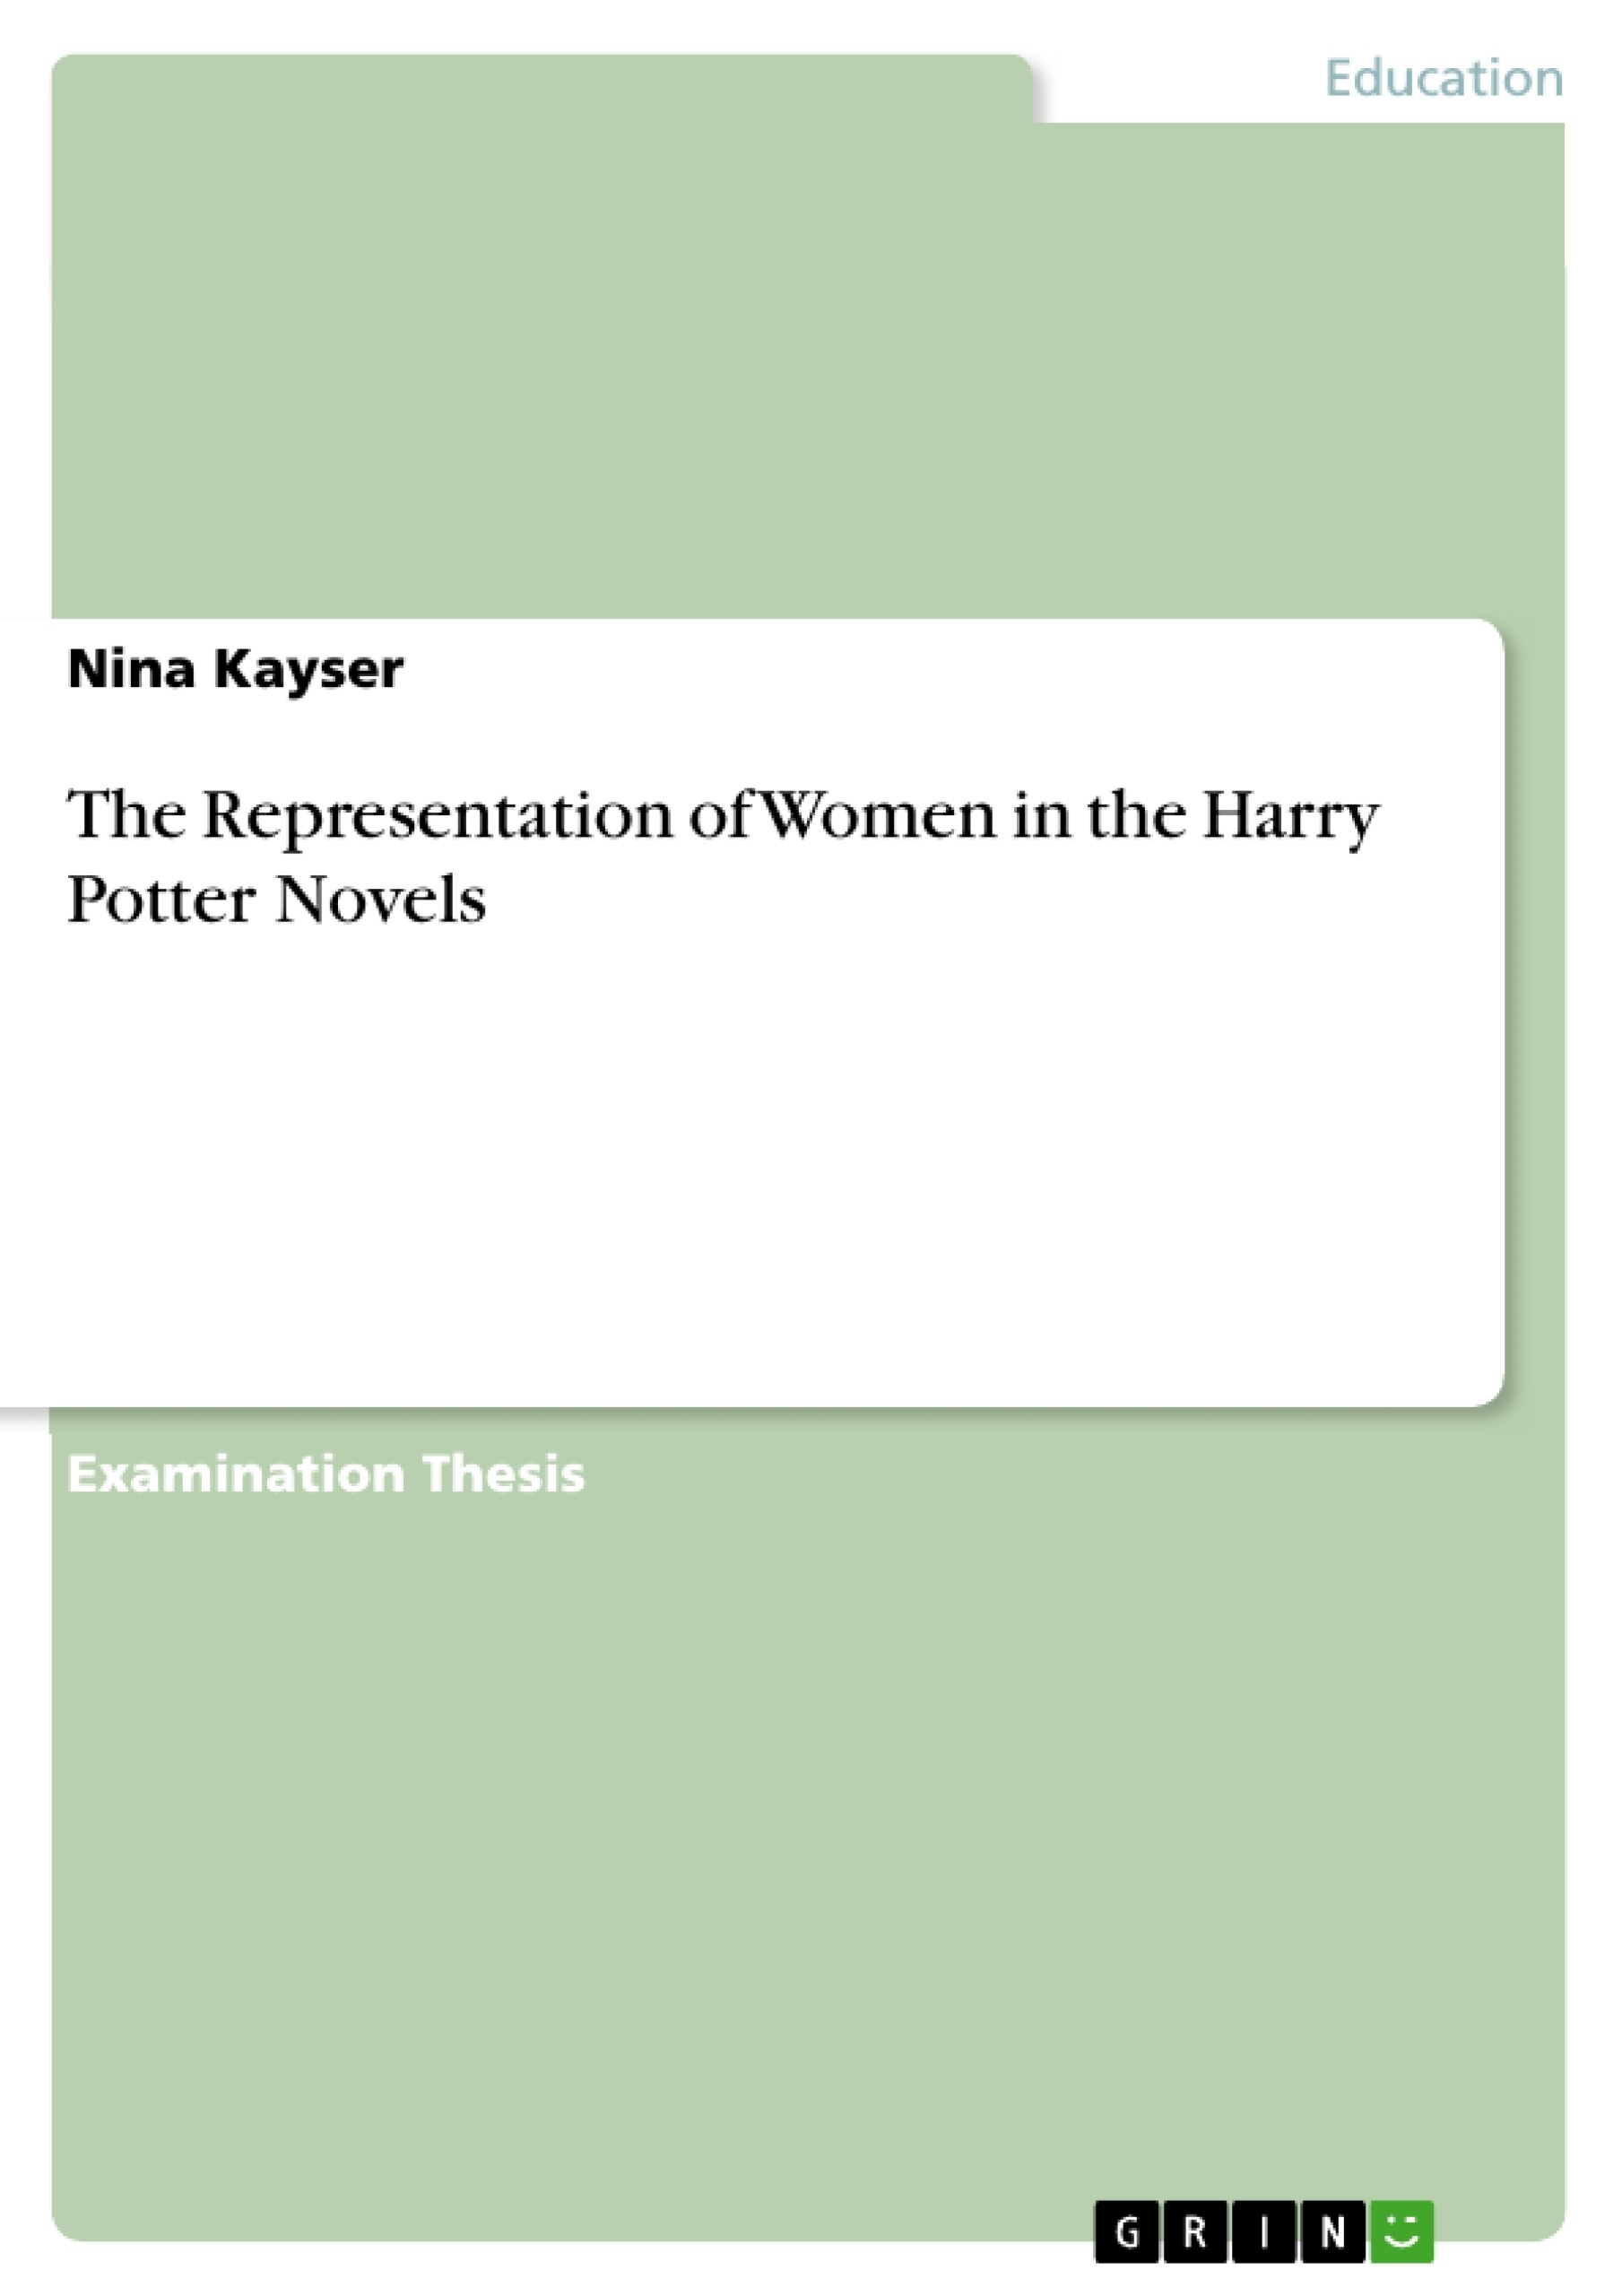 Title: The Representation of Women in the Harry Potter Novels